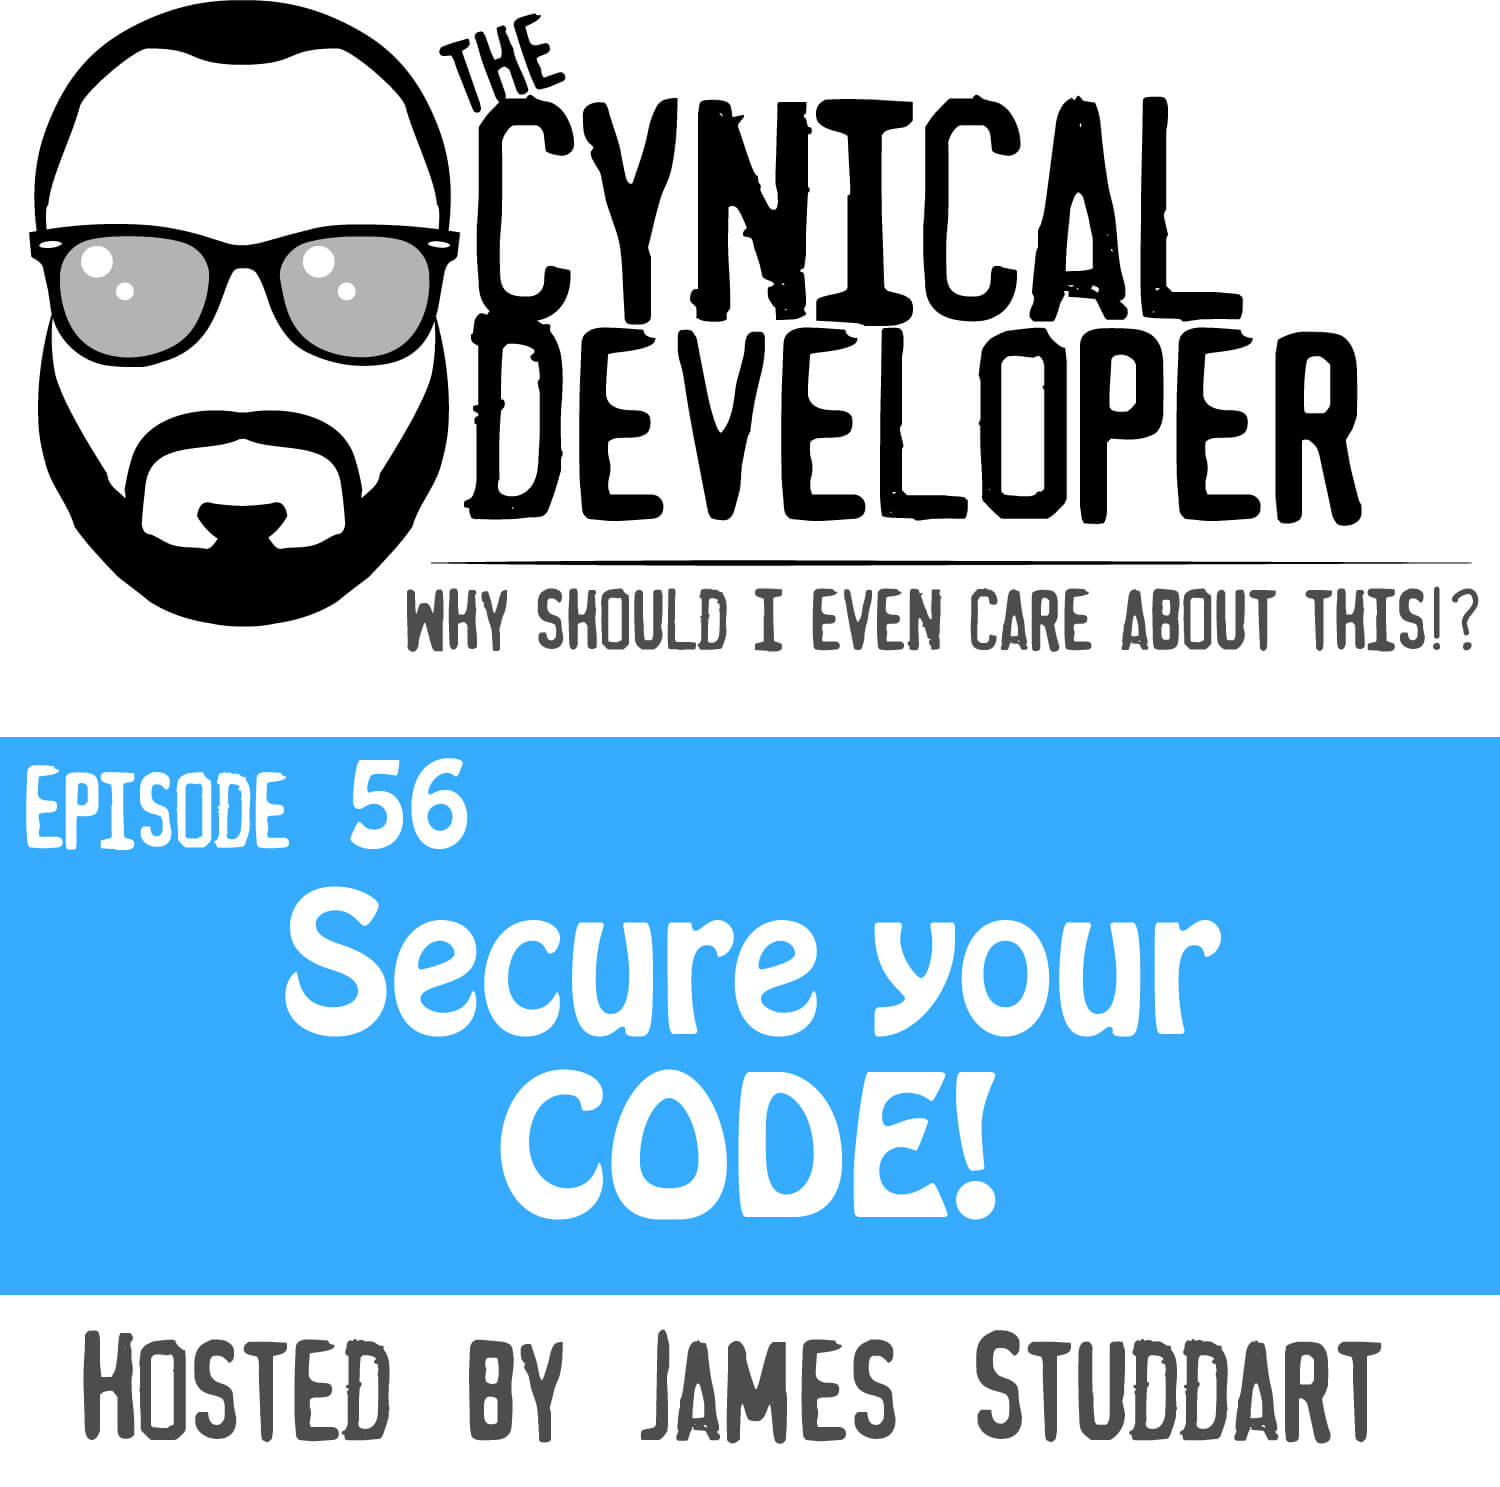 Episode 56 - Secure your CODE!